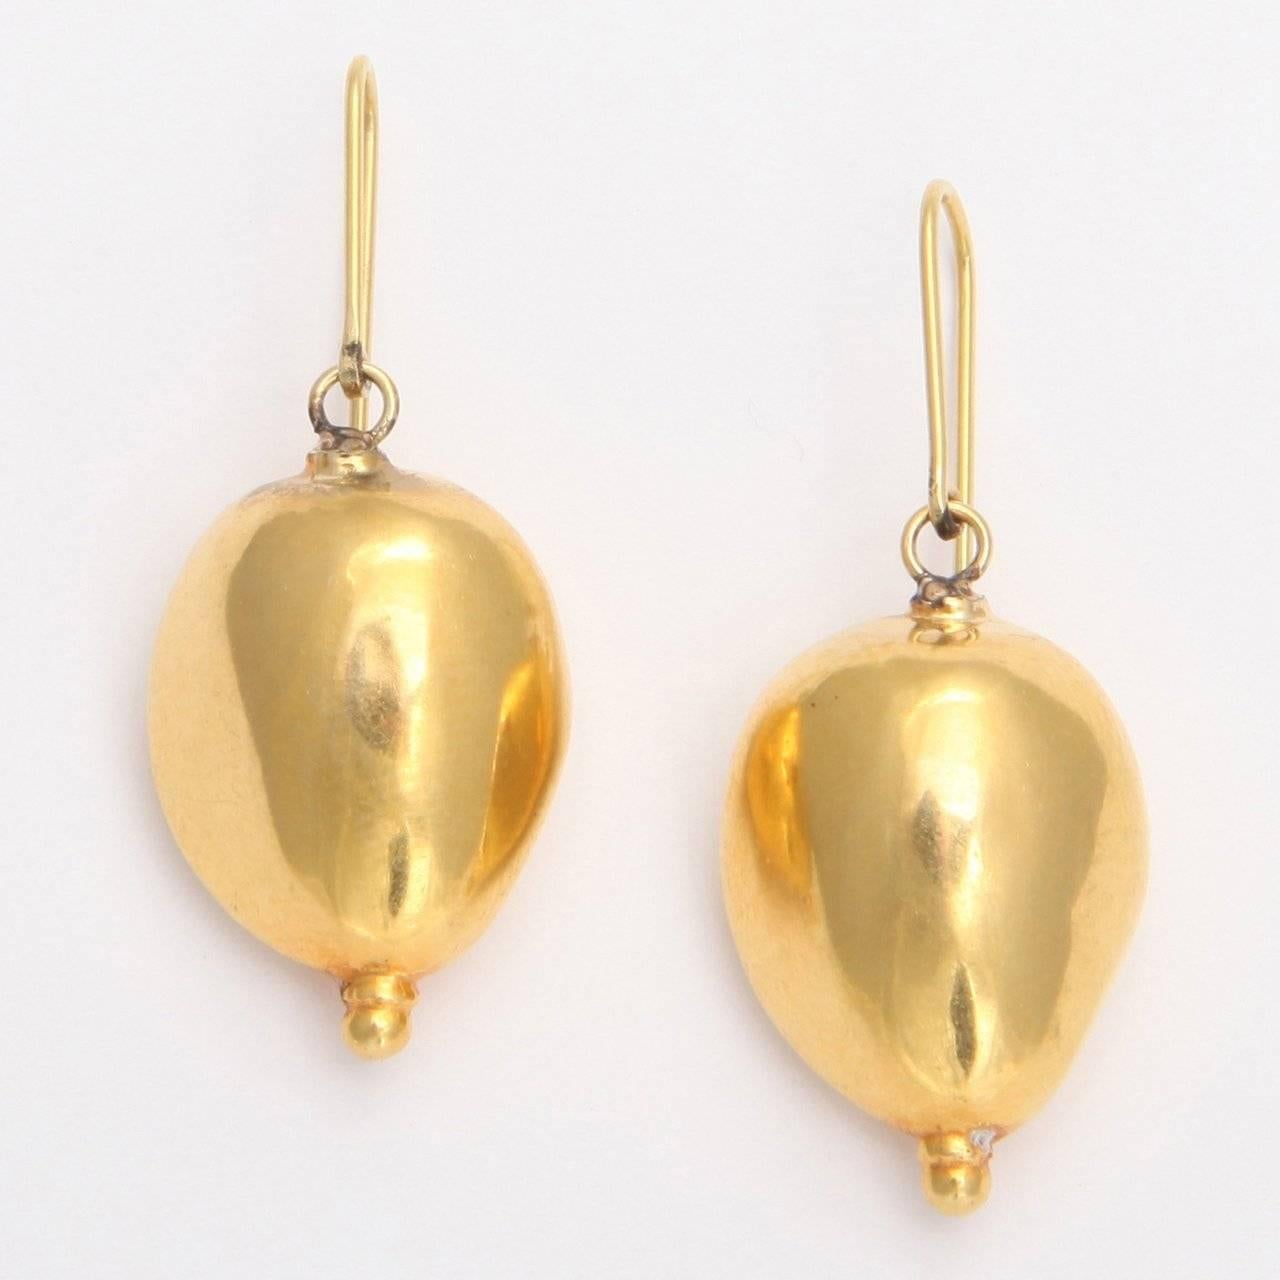 A pair of 18kt yellow gold edamame bead earrings.
Length: 1.50 inches